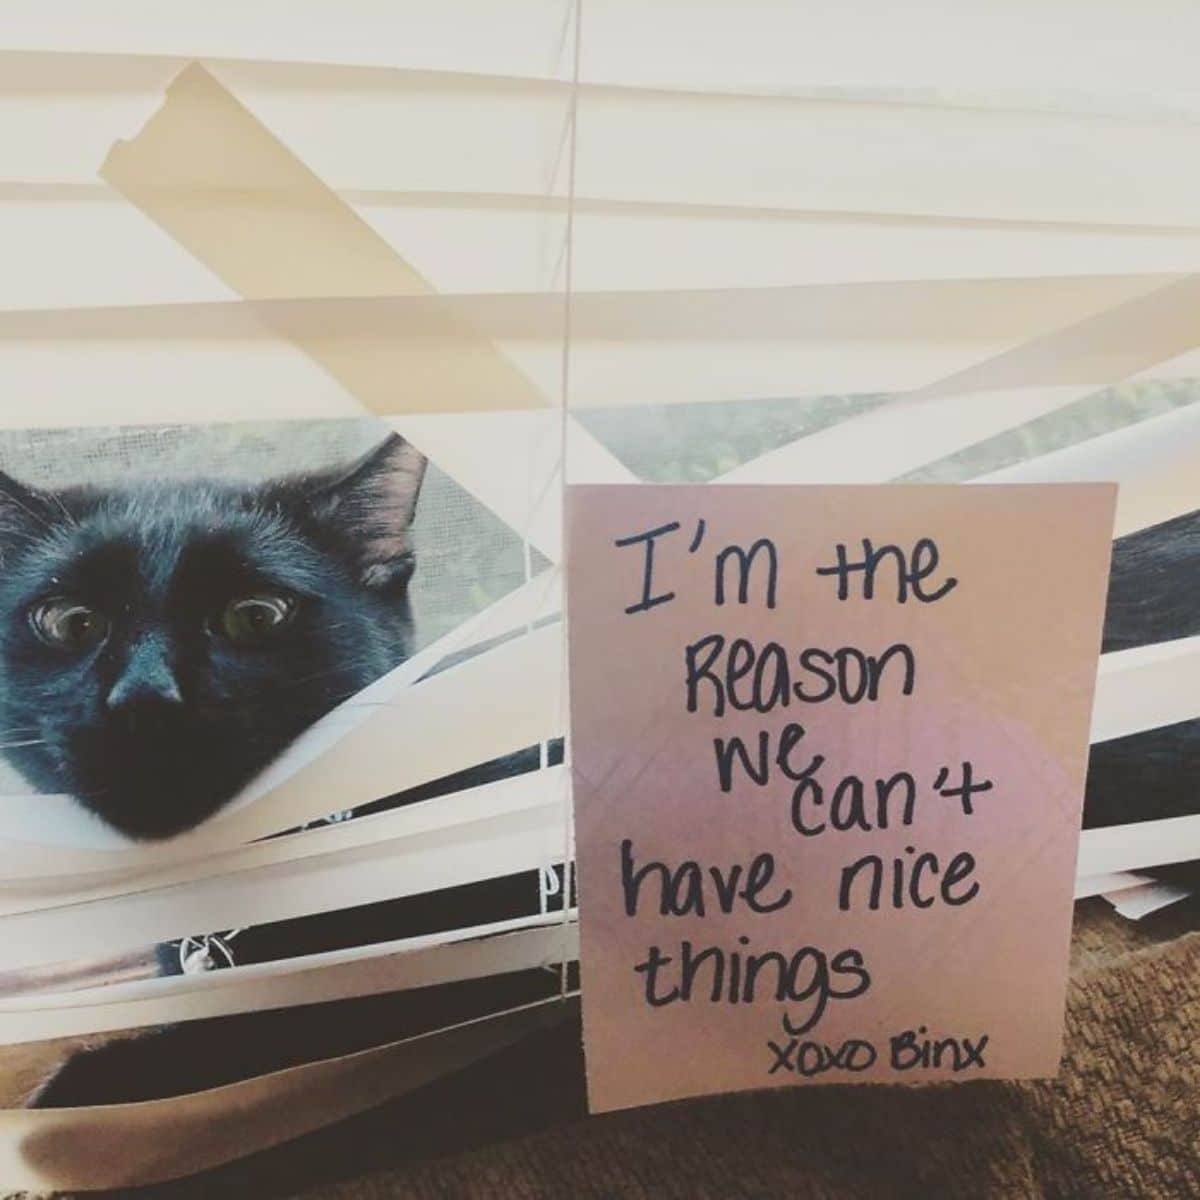 black cat sticking its head through broken white window blinds with a note saying "I'm the reason we can't have nice things xoxo Binx"